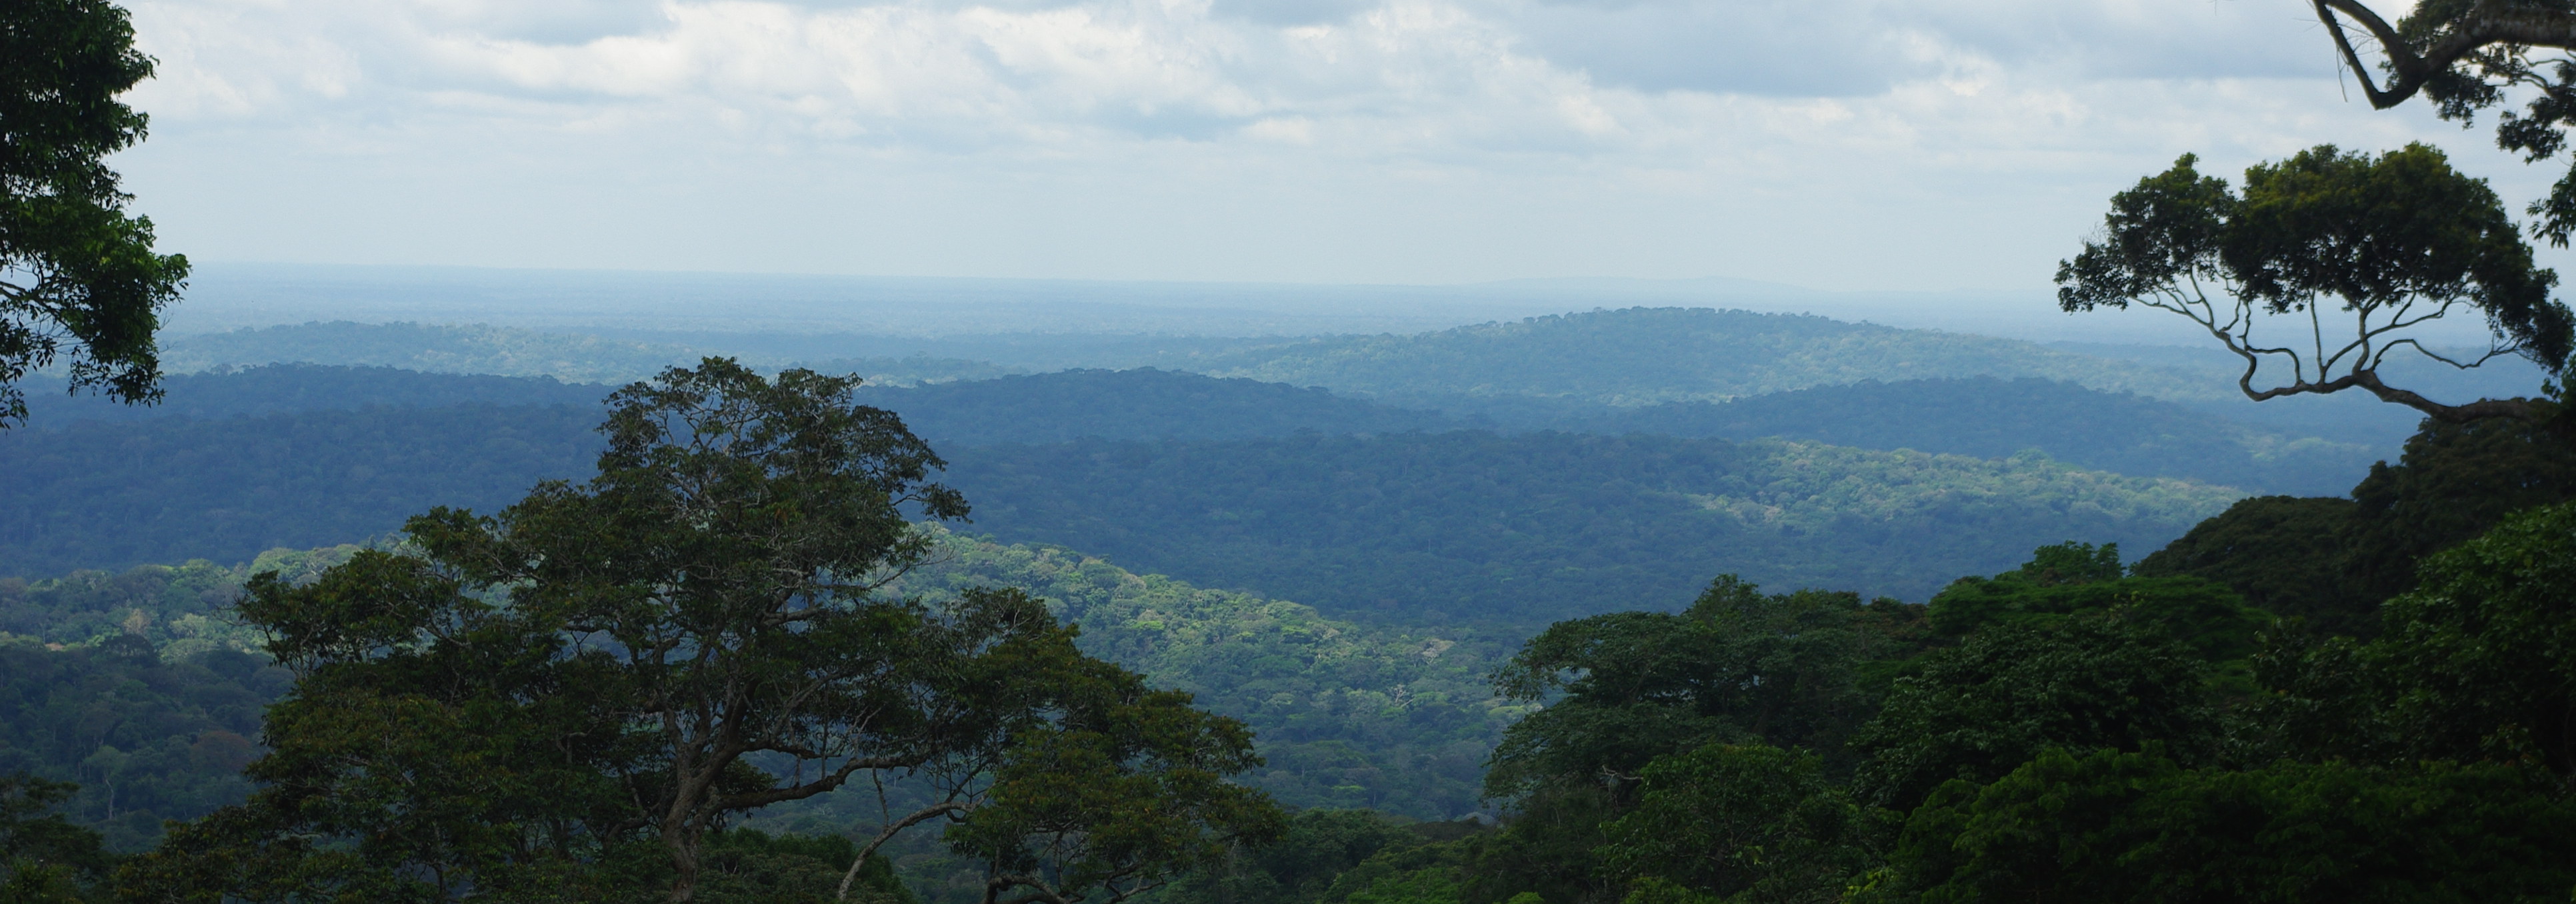 Tropical rain forest in Gabon, view from Belinga mountain.